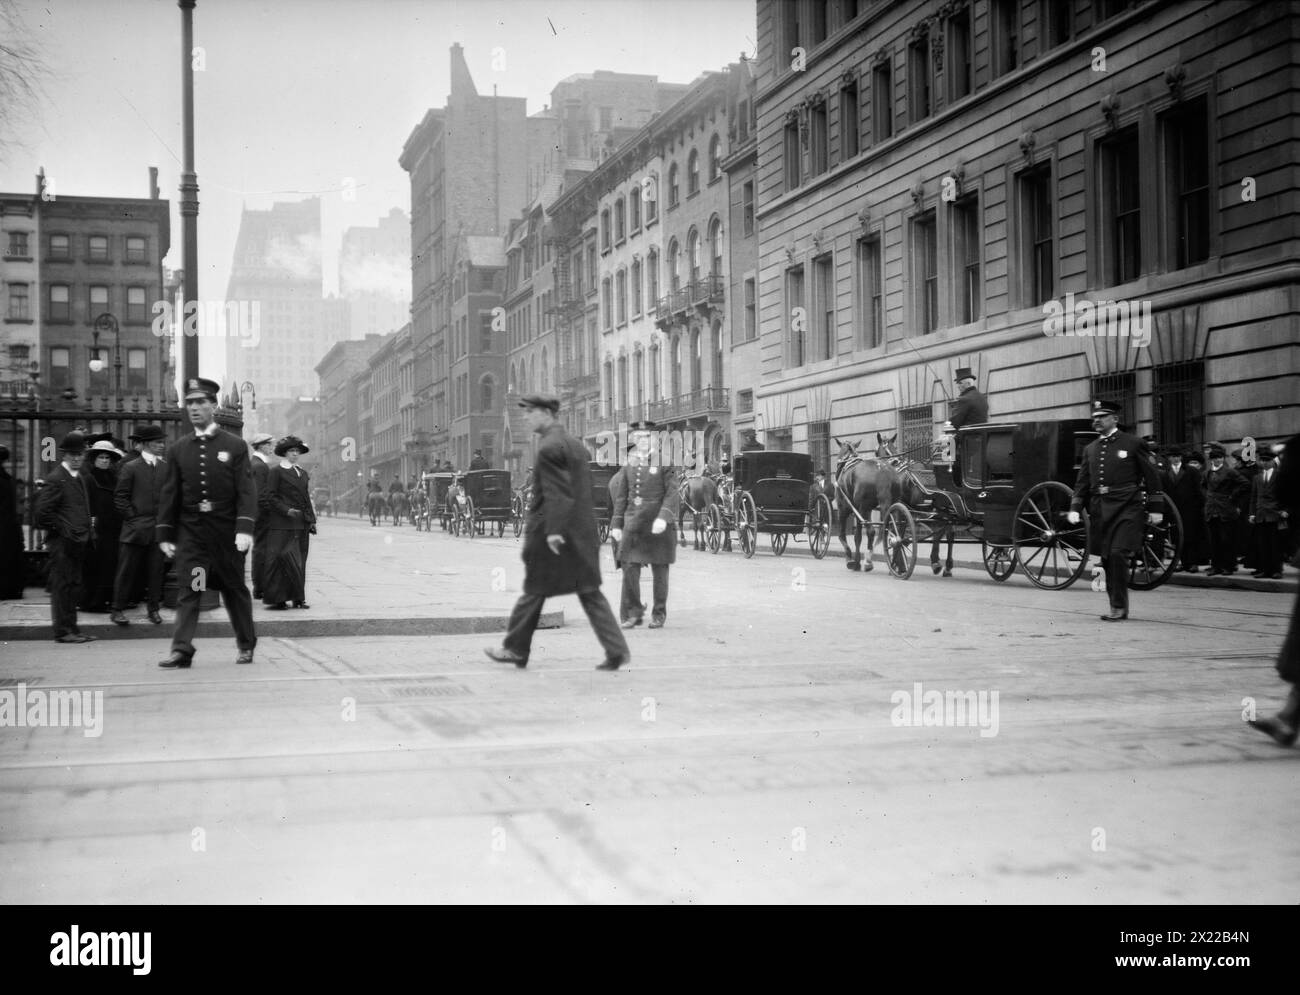 Morgan funeral - police guard Stuyvesant Sq., 1913. Shows funeral of financier John Pierpont Morgan (1837-1913) which took place on April 14, 1913 in New York City. Stock Photo